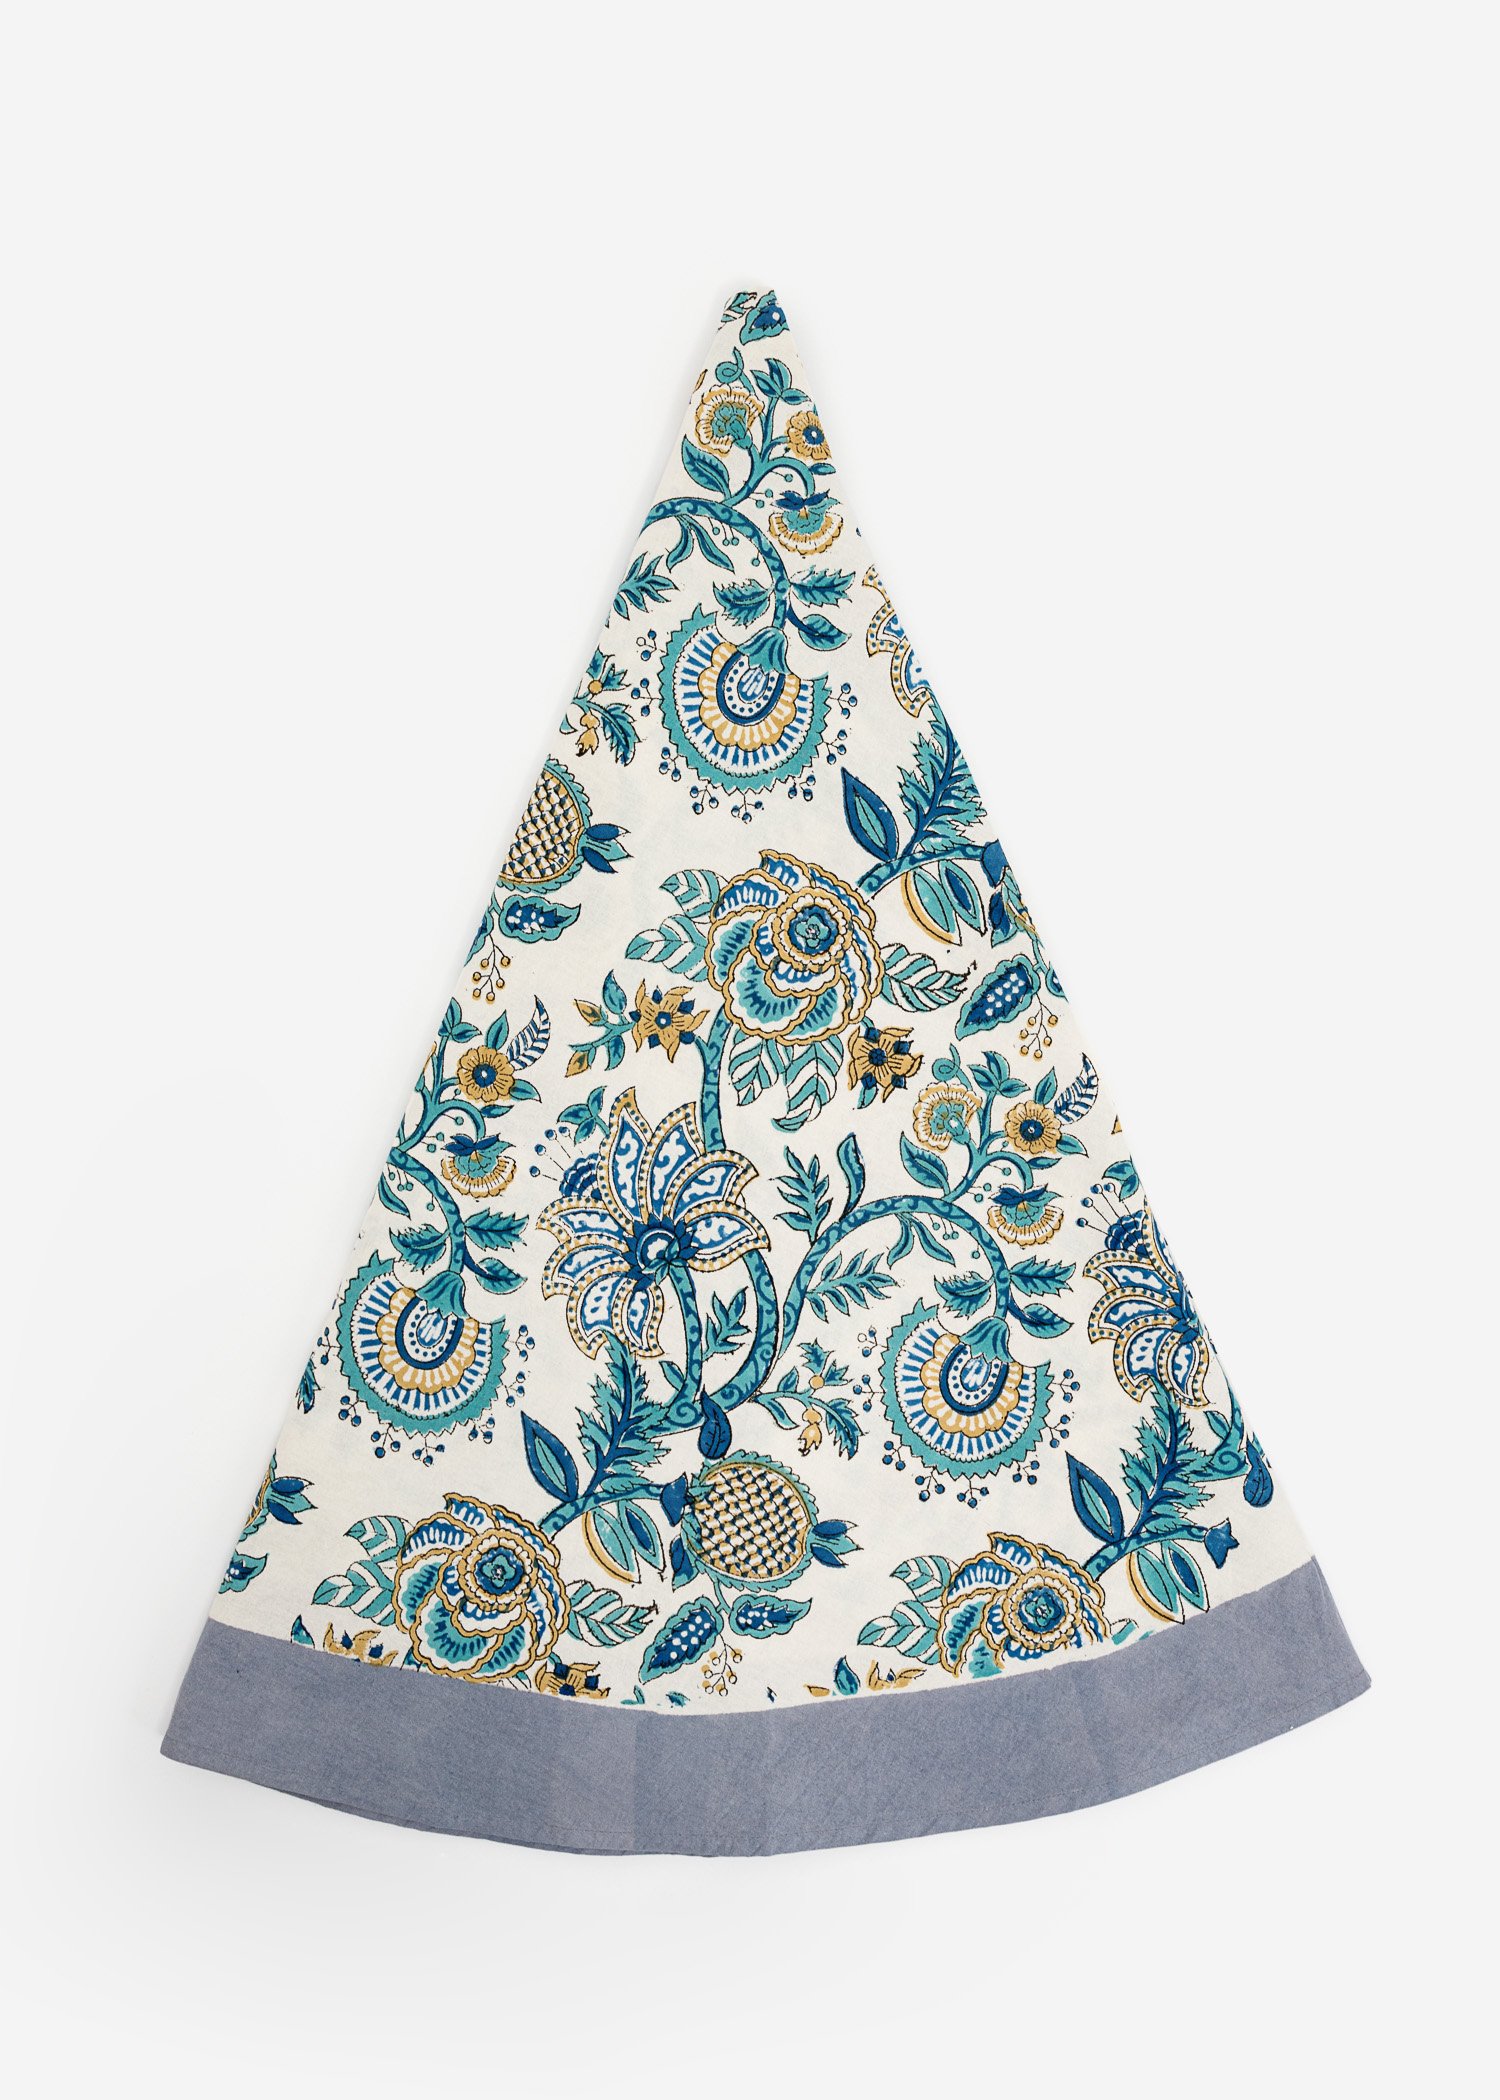 Round block-printed tablecloth